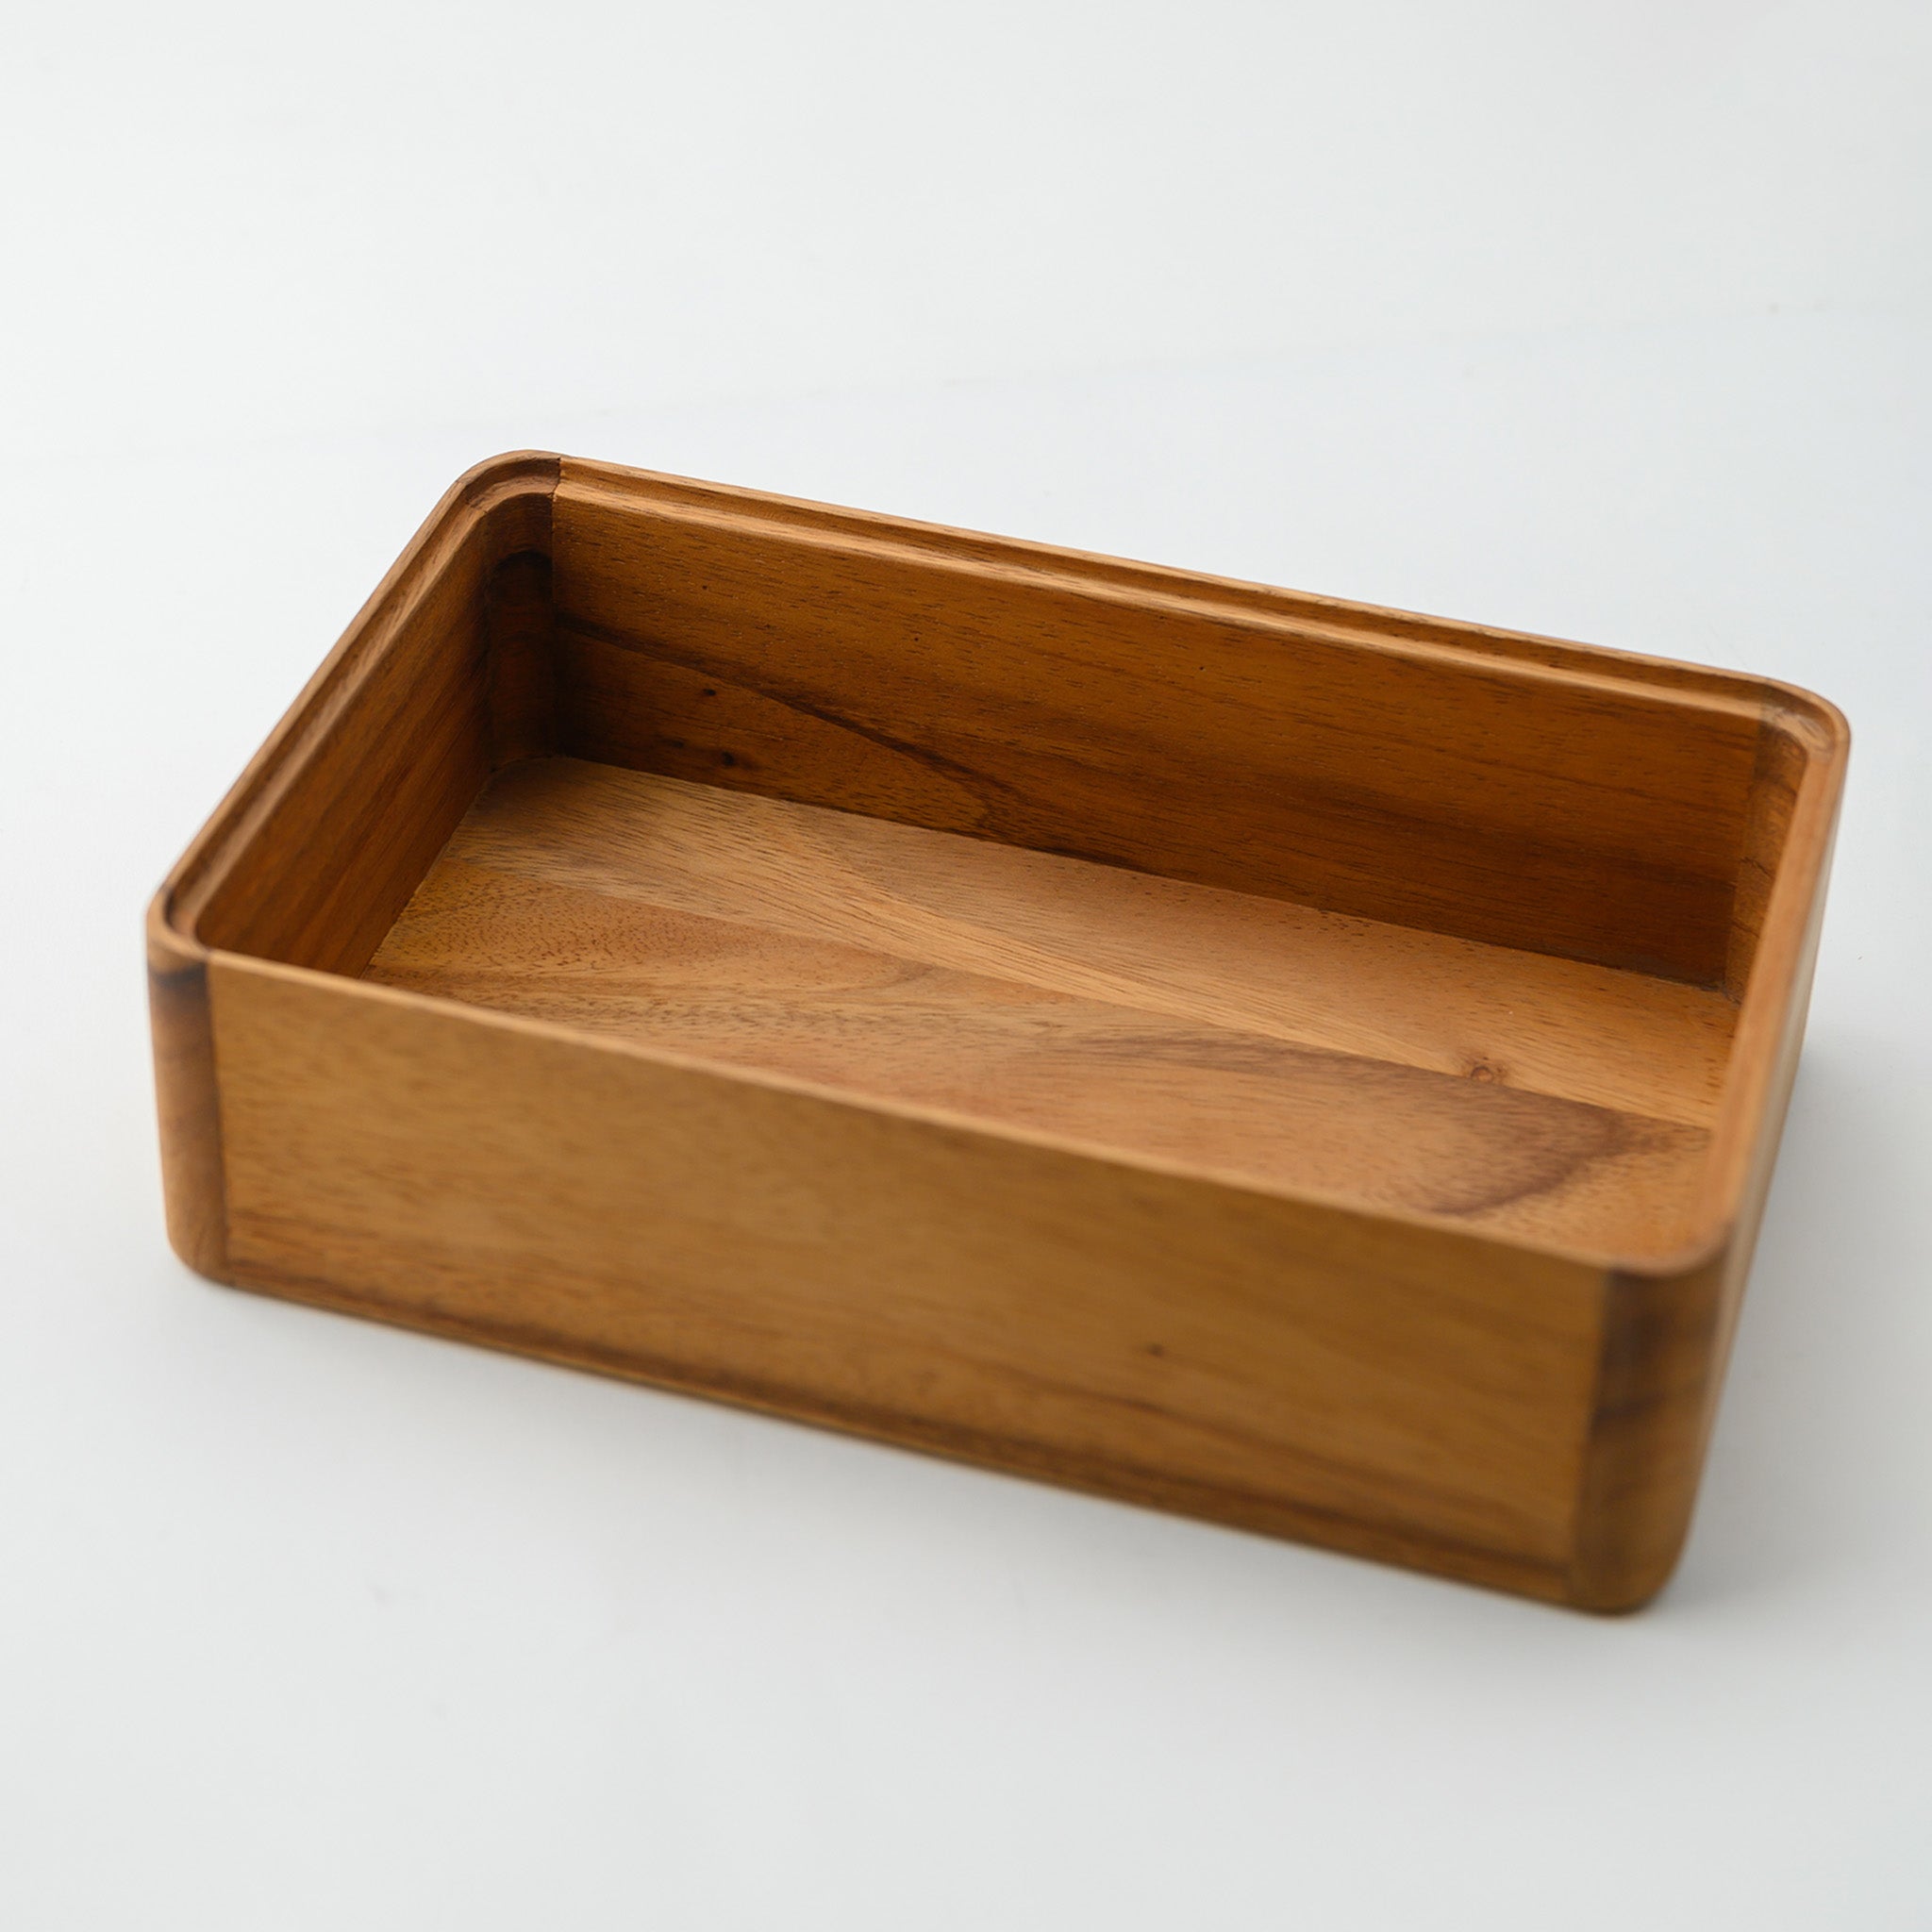 LIMPID ORGANIZER BOXES WITH LID 16.5 x 26 CM.